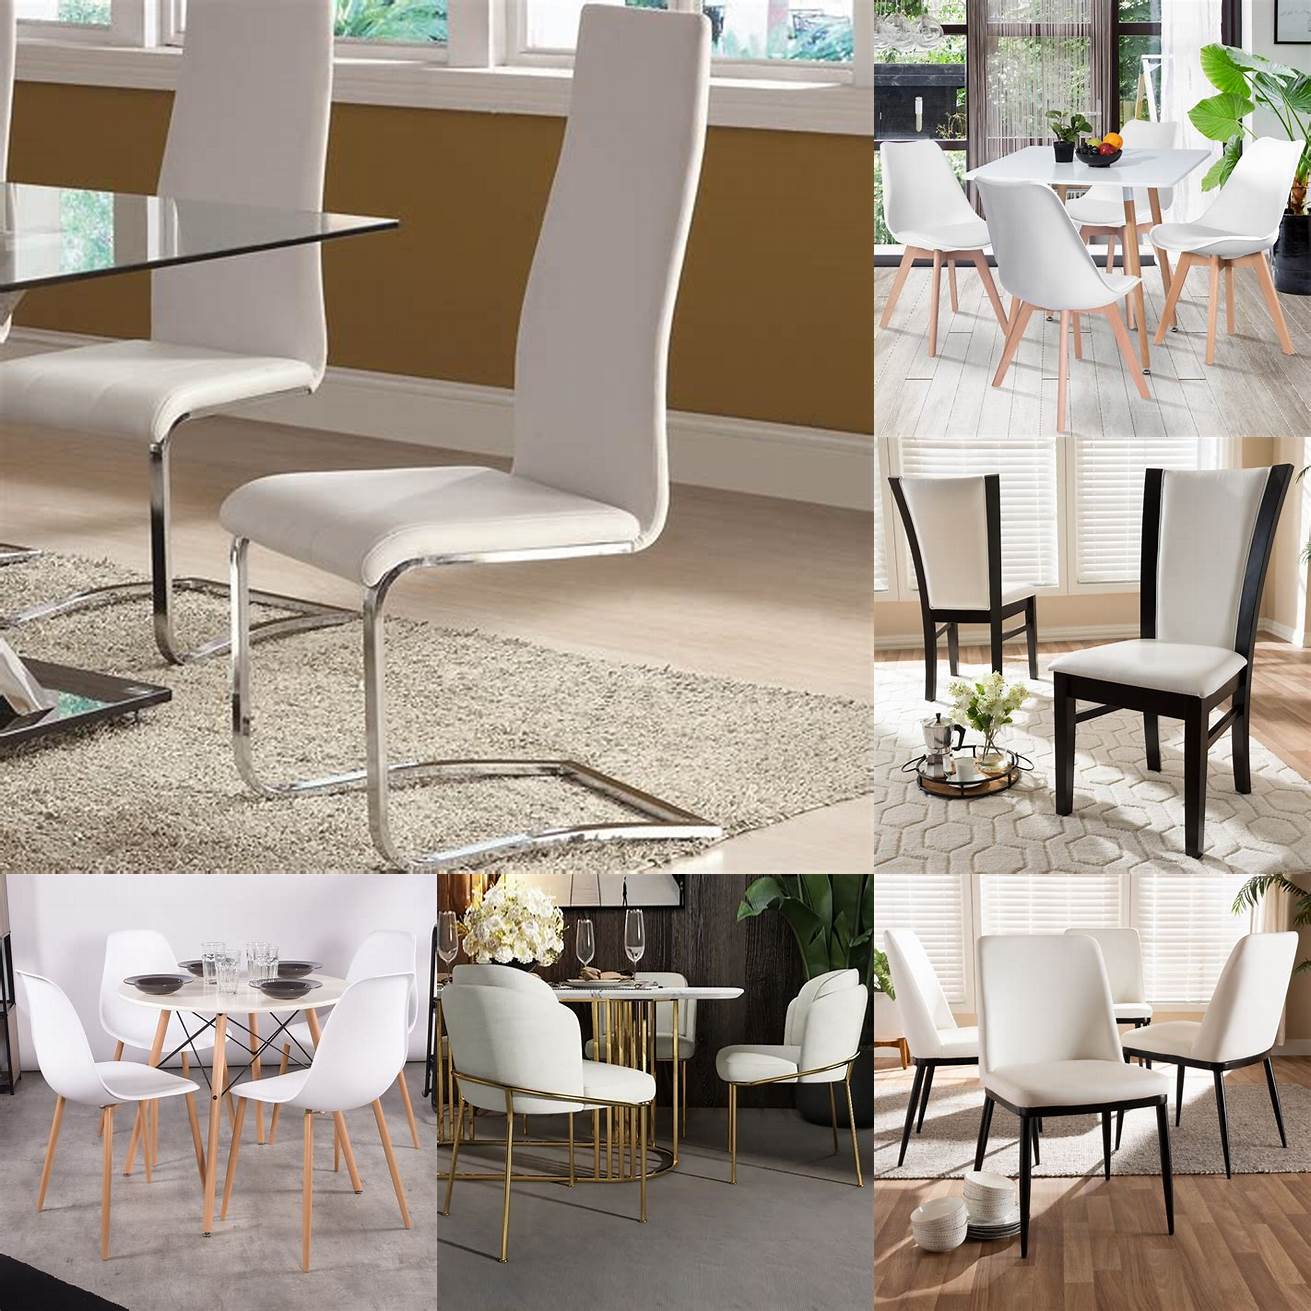 A white dining chair with a modern design